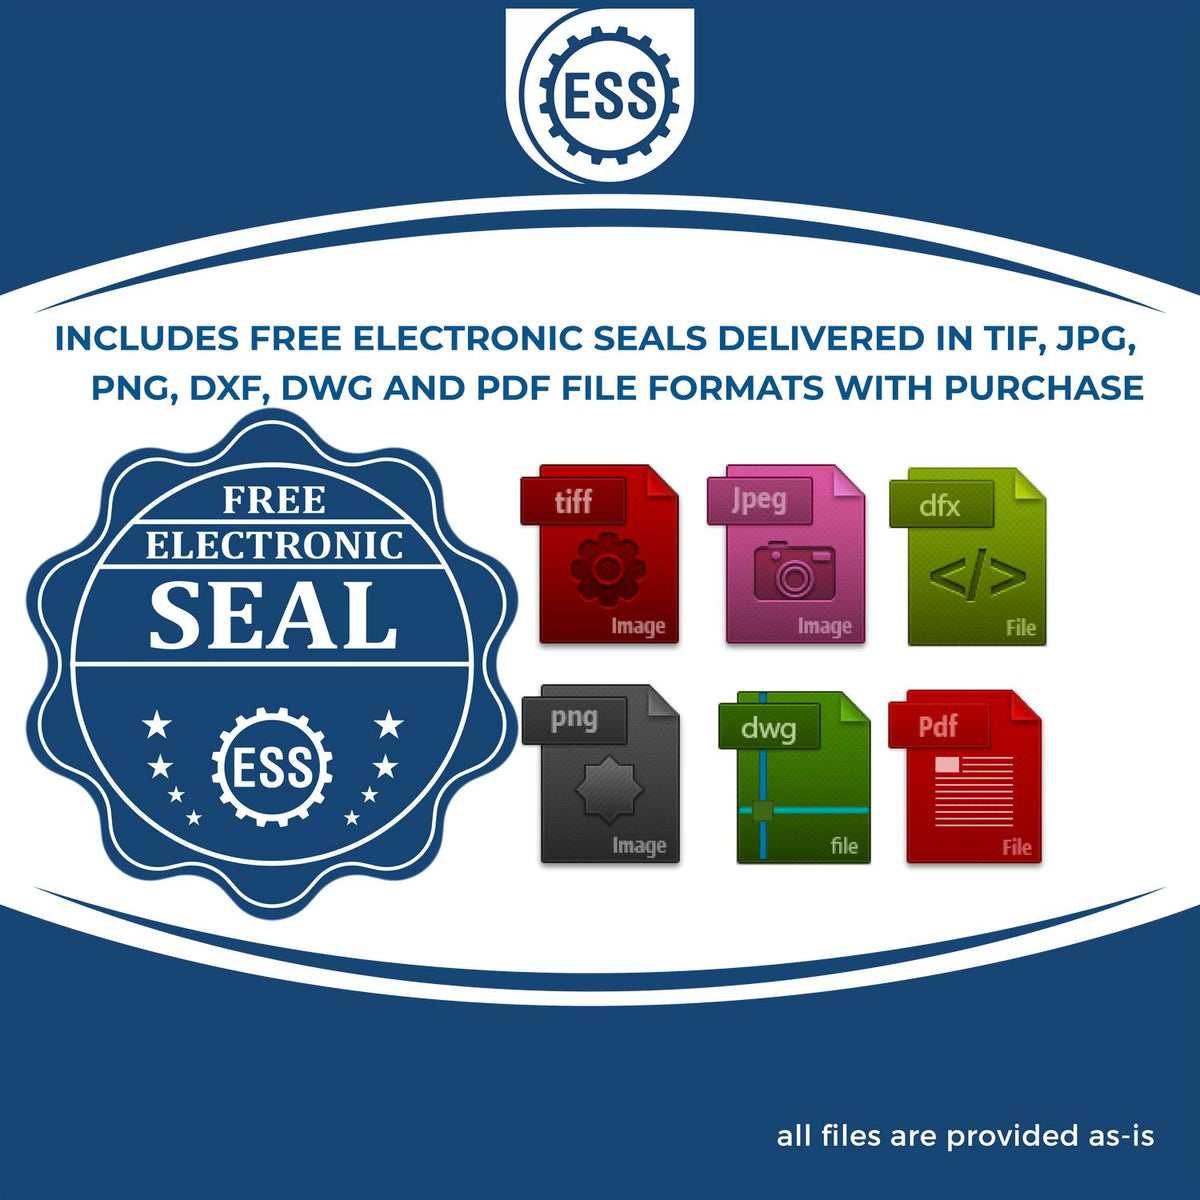 An infographic for the free electronic seal for the Wooden Handle Arkansas Rectangular Notary Public Stamp illustrating the different file type icons such as DXF, DWG, TIF, JPG and PNG.